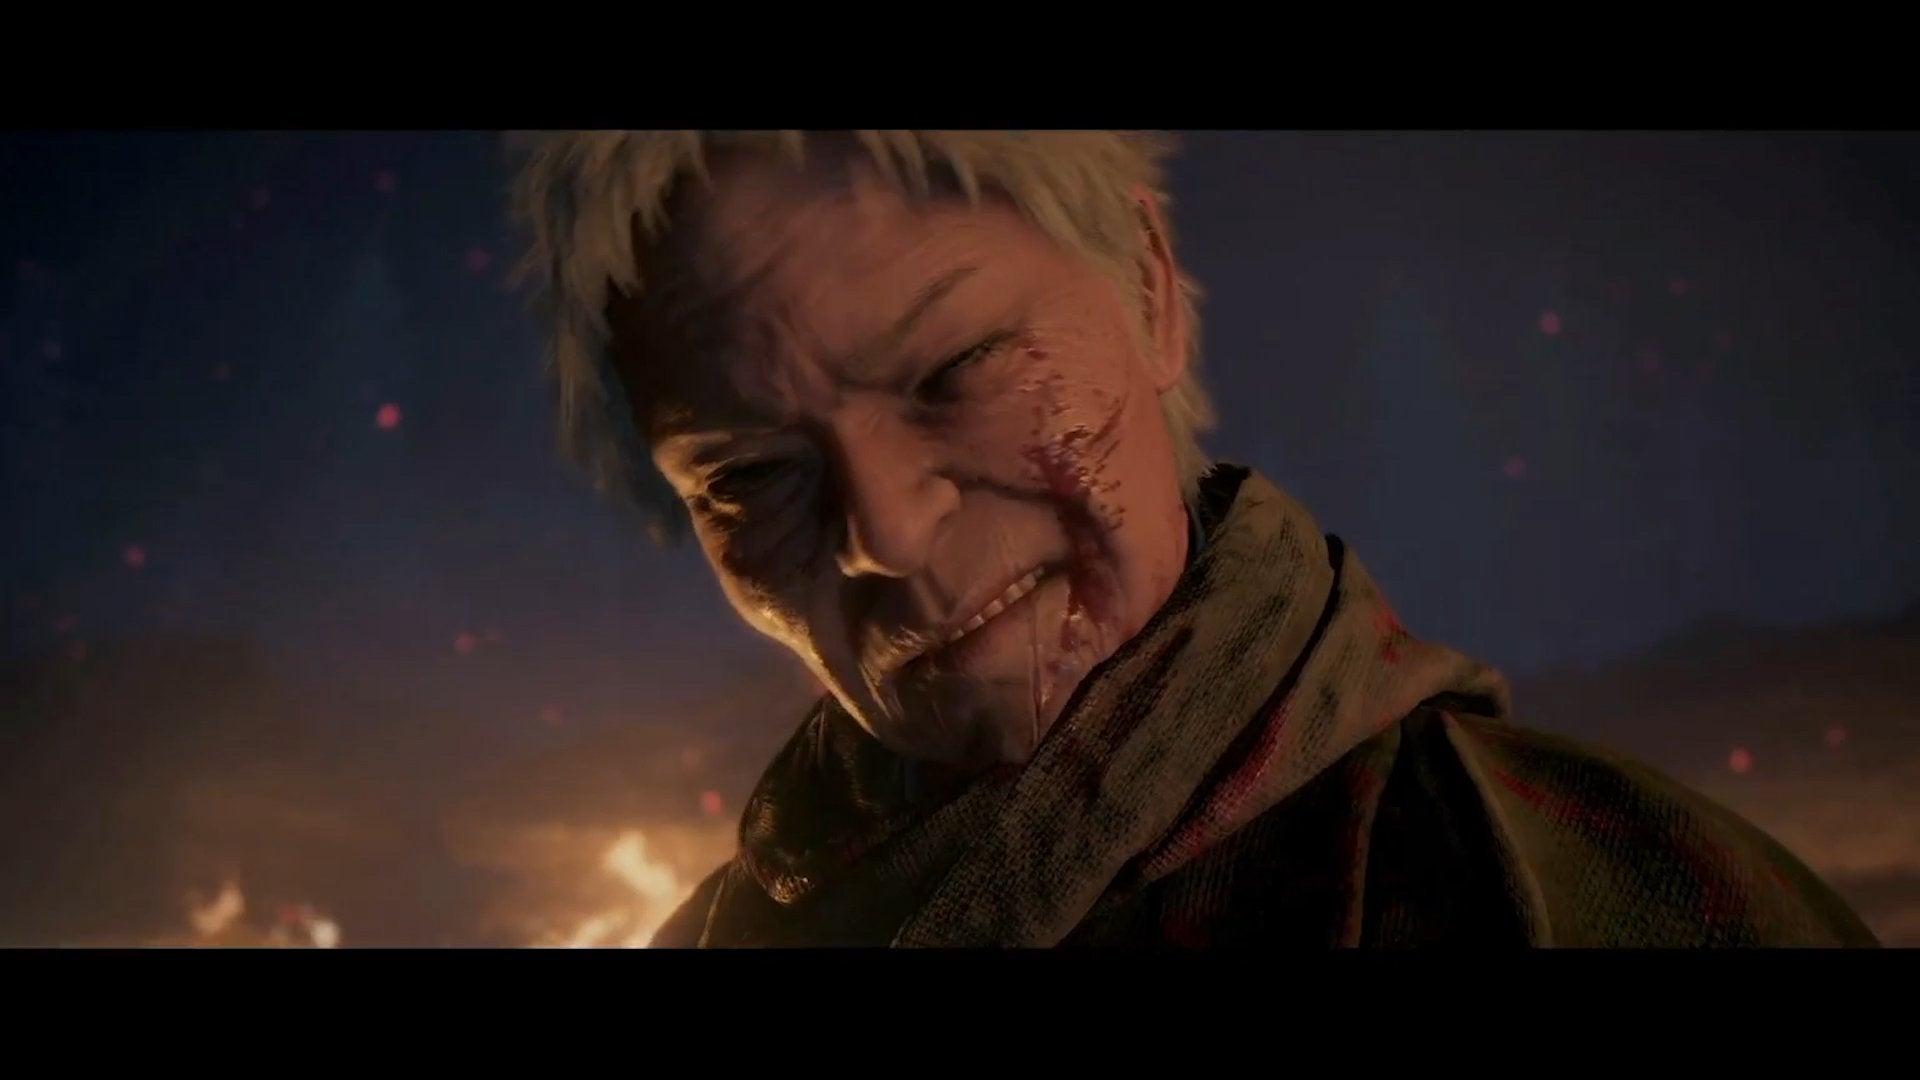 A close-up of the face of the character named The Blacksmith in Rise of the Ronin.